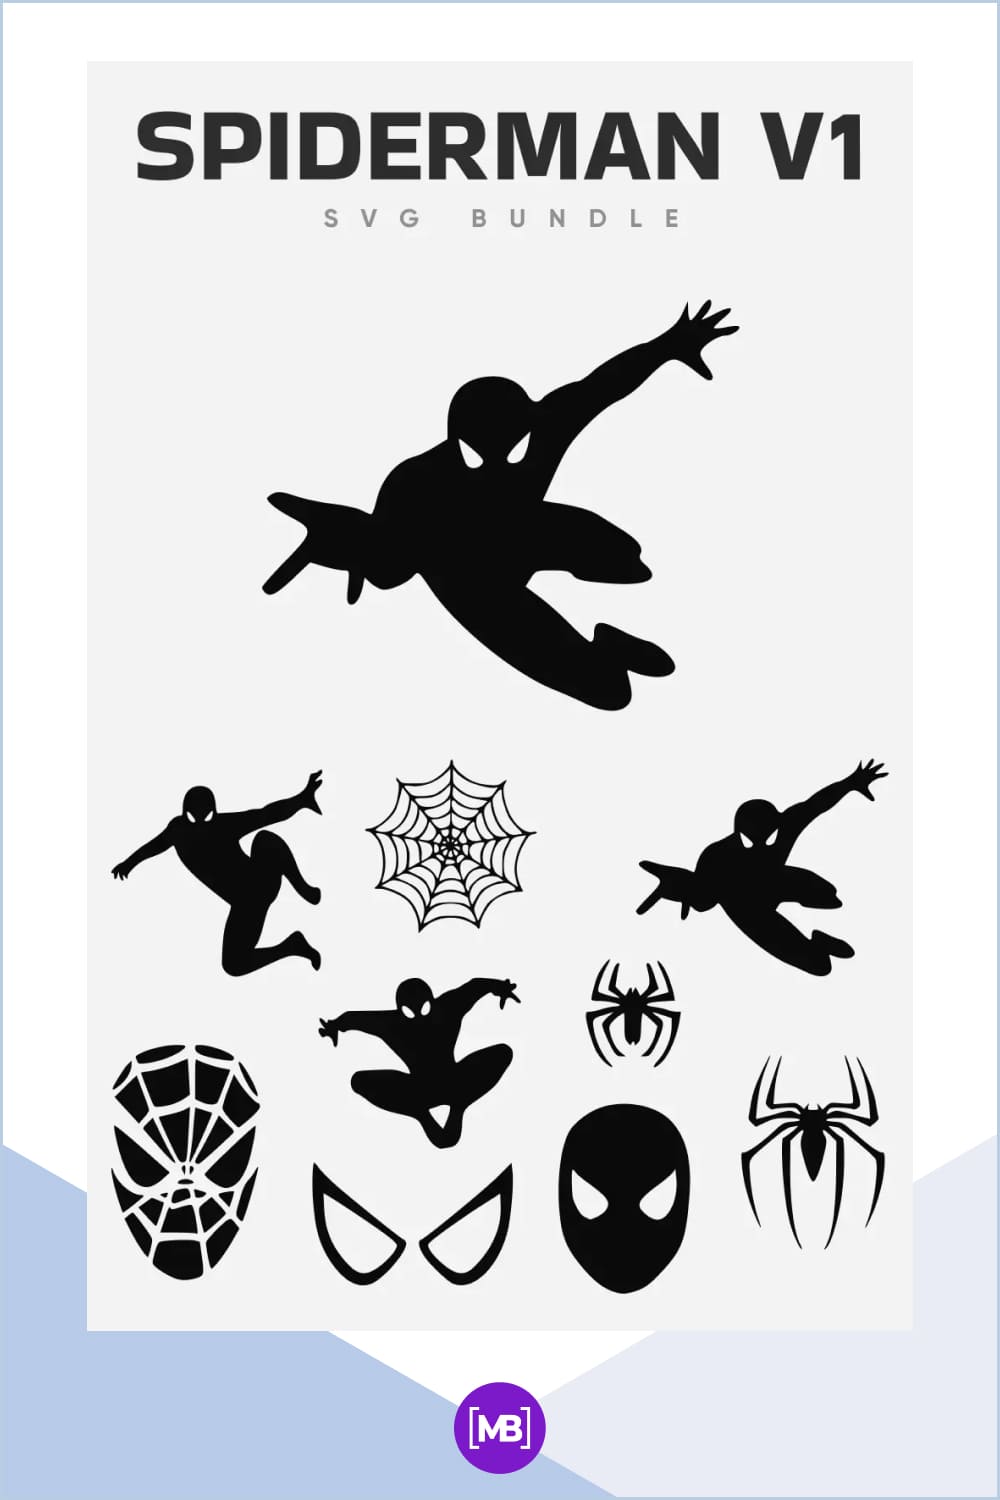 Black silhouettes of Spiderman.